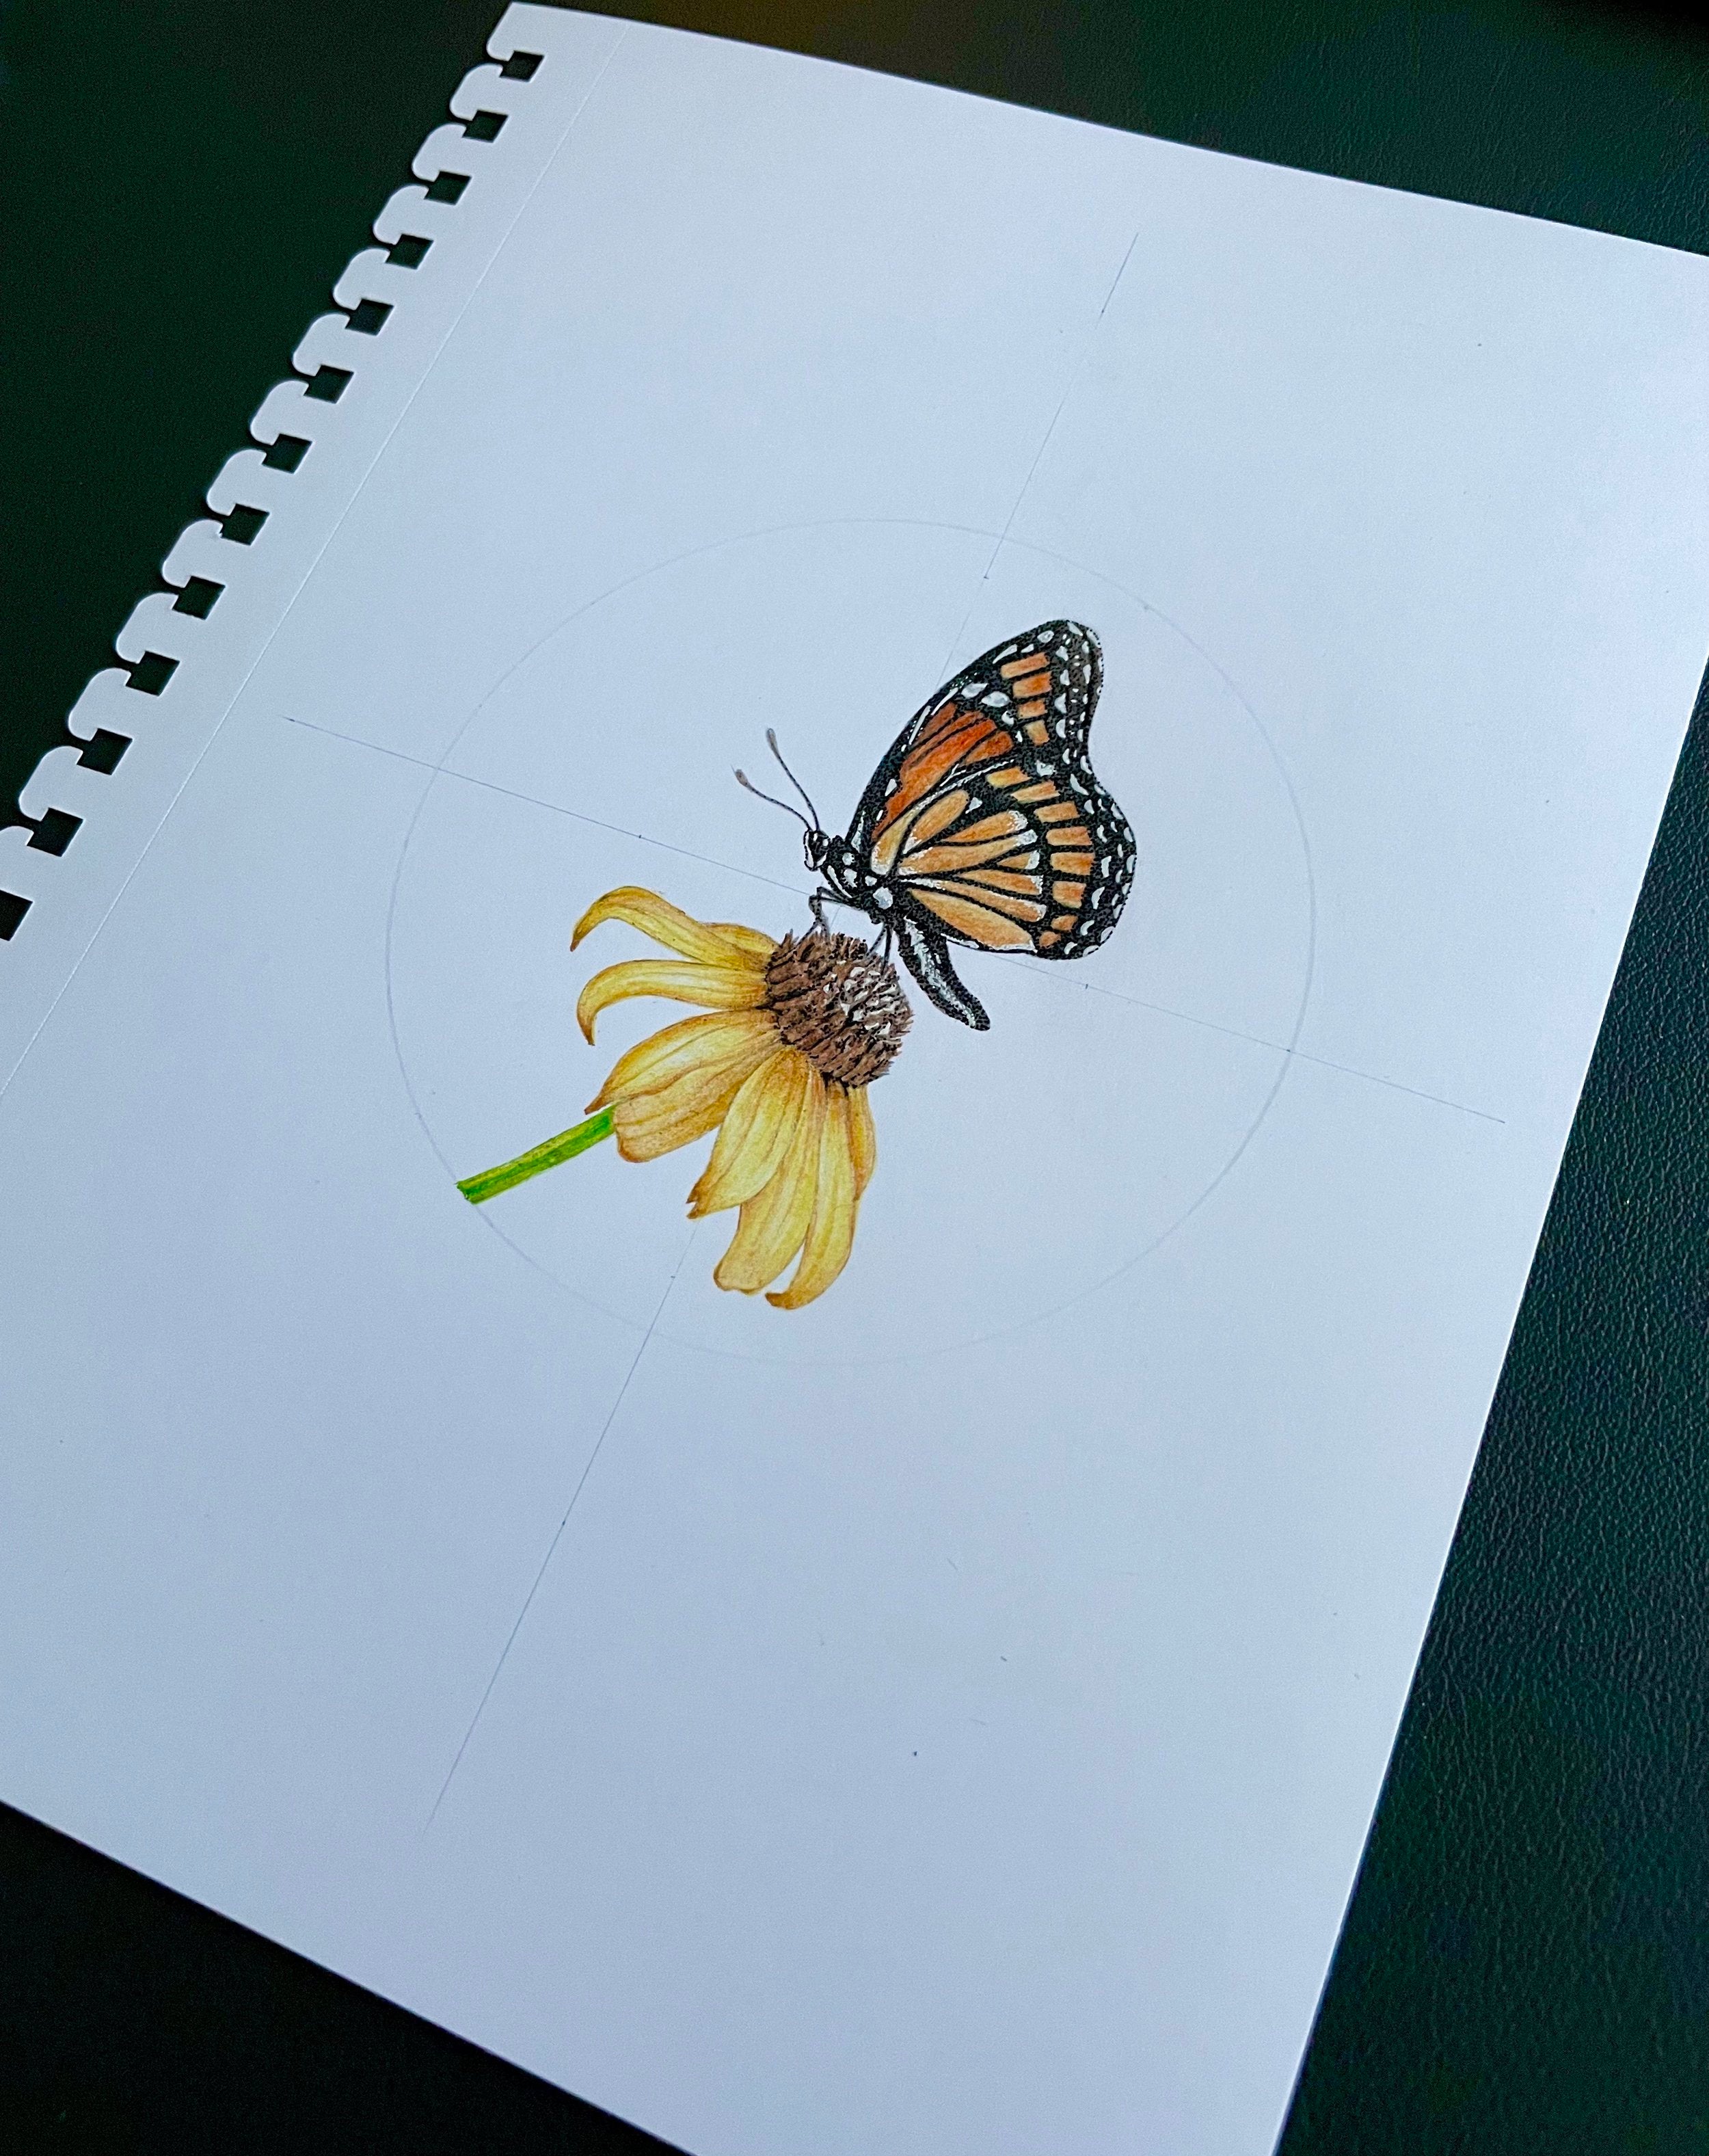 40 Beautiful Simple Butterfly Drawings In Pencil - Hobby Lesson | Flower  sketches, Pencil drawings of flowers, Butterfly sketch